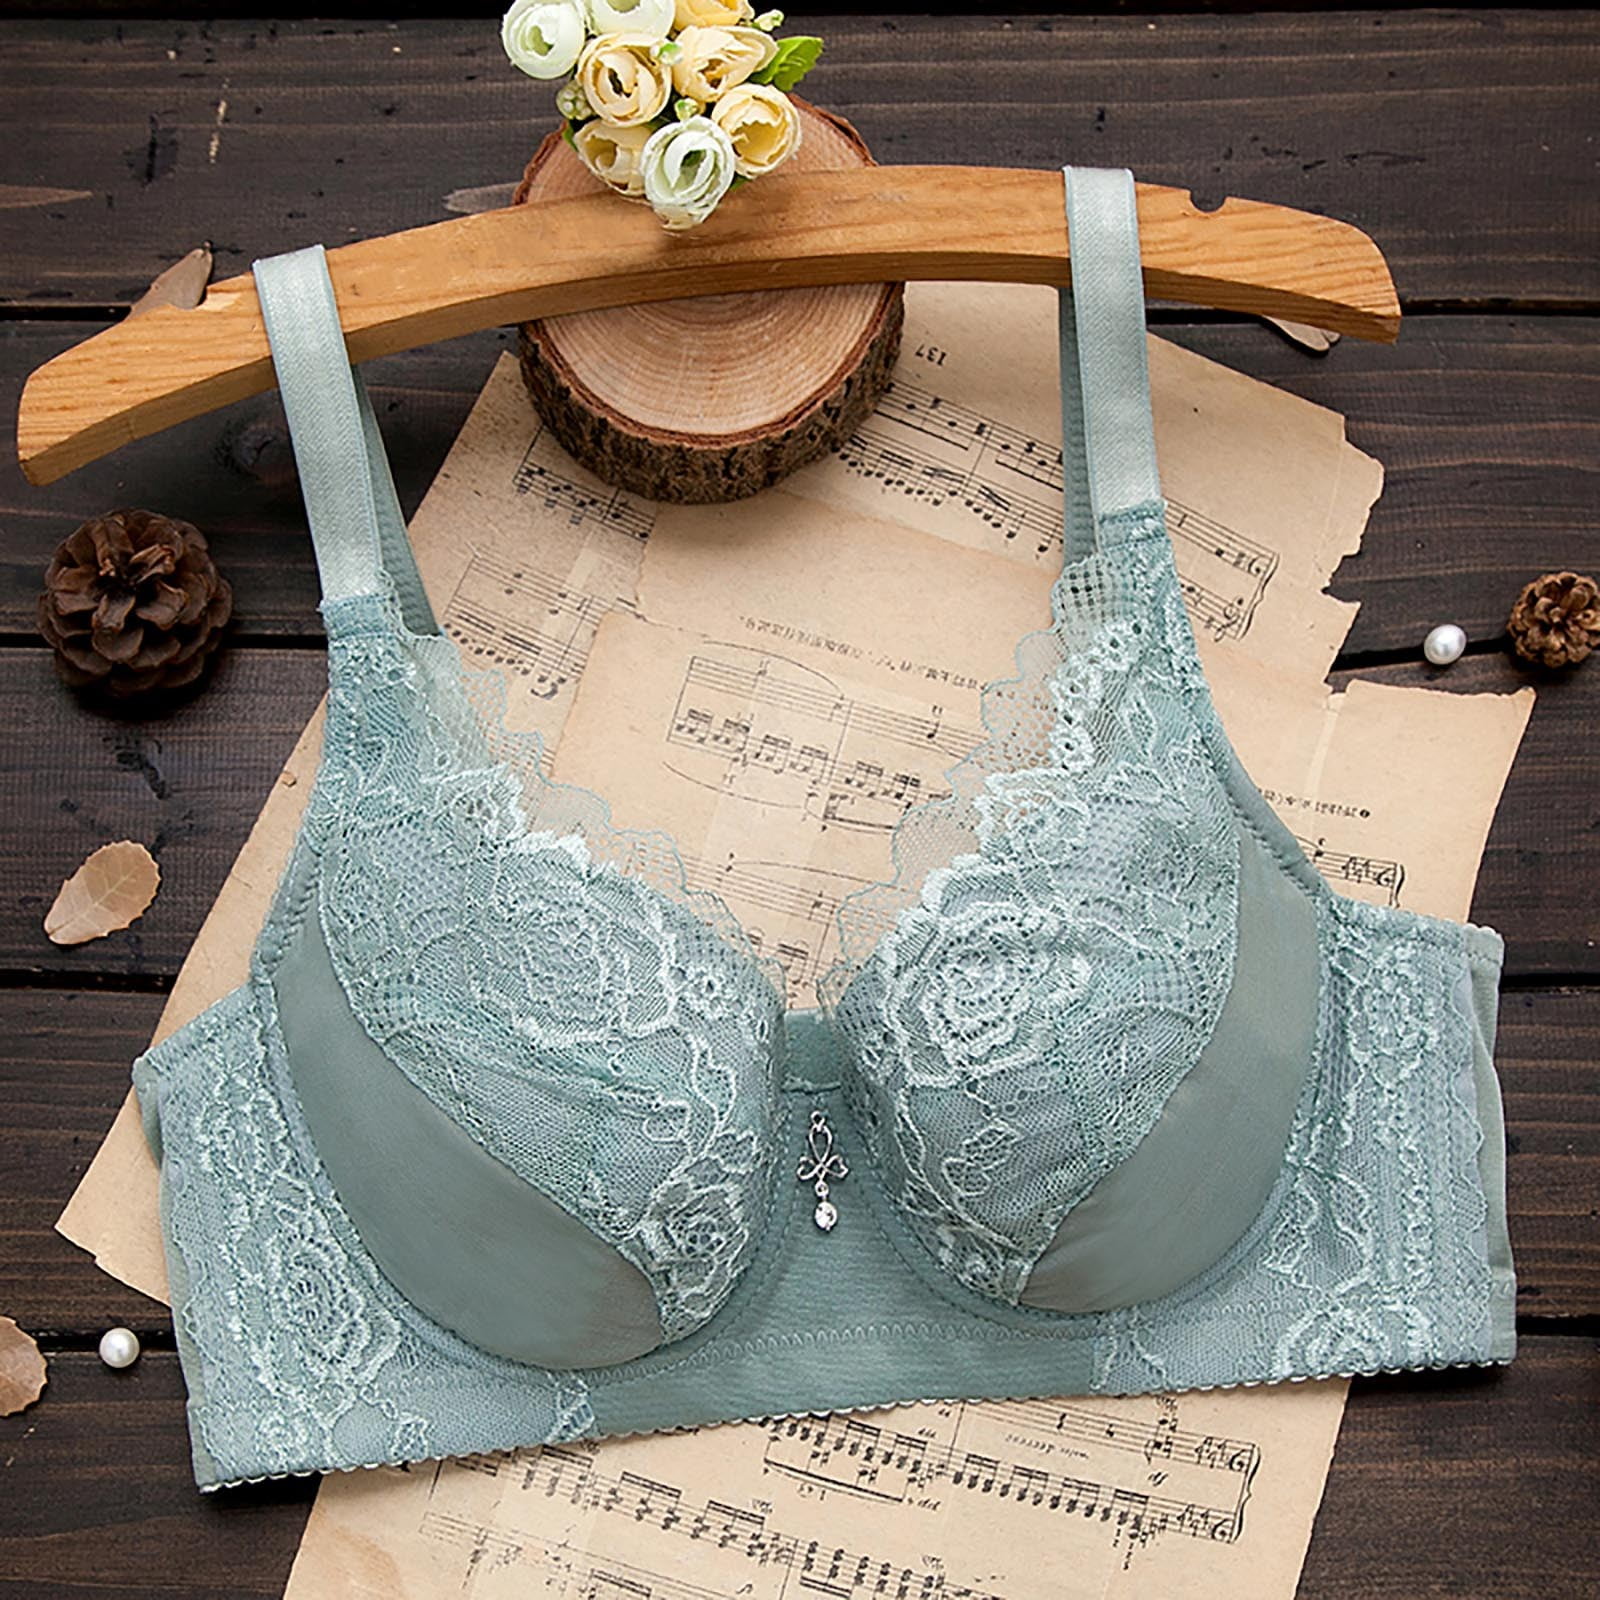 CAICJ98 Lingerie for Women Plus Size Women's Front Closure Posture Bra Full  Coverage Back Support Wireless Comfy Blue,38D 